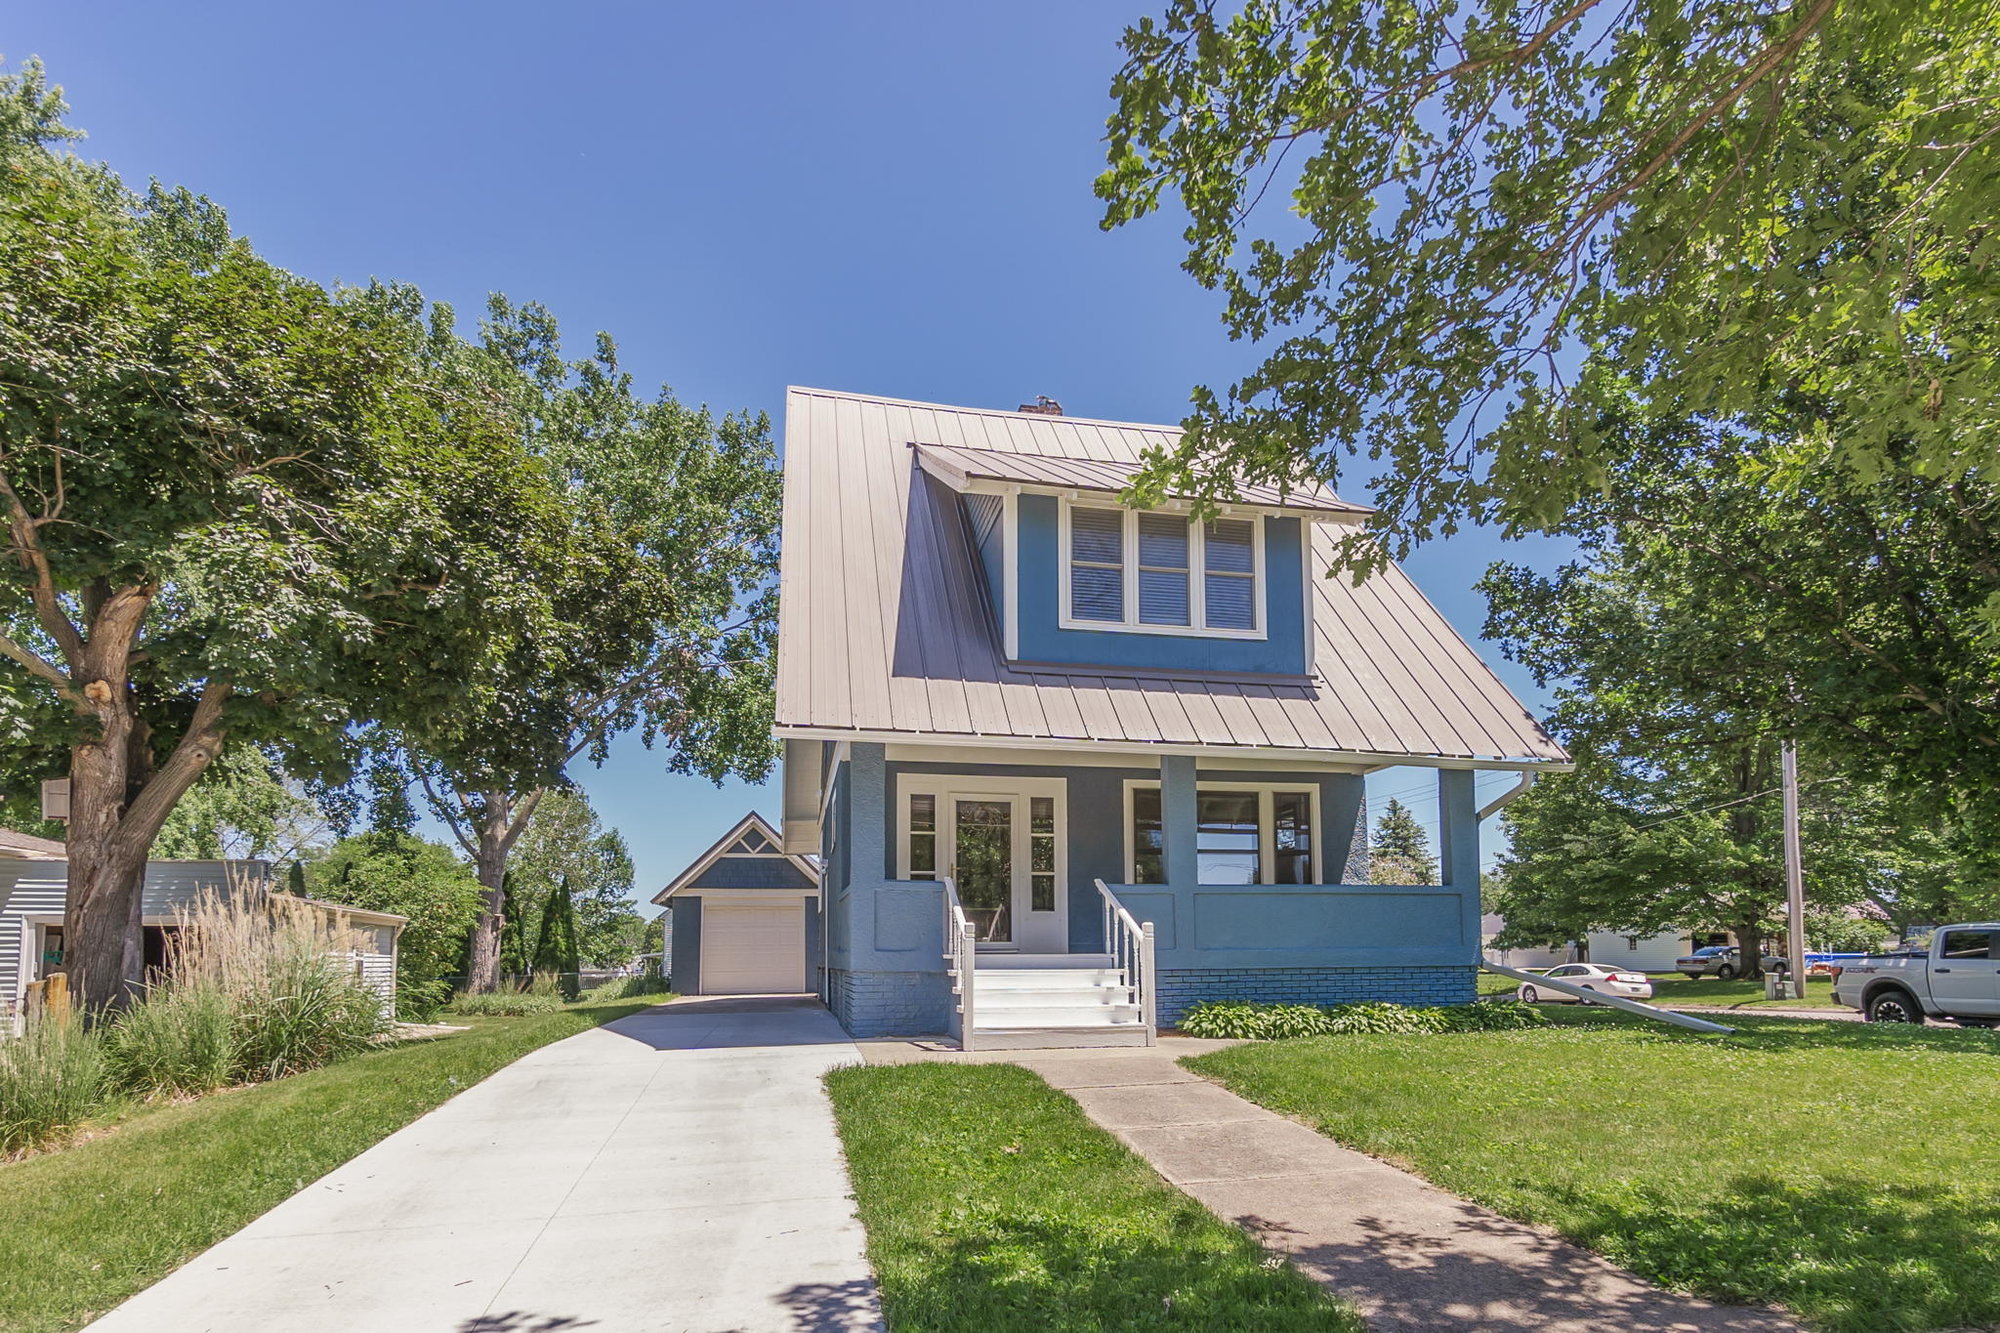 The Best of Both Worlds - Rich Character and Modern Updates in this 1900 Iowa Home